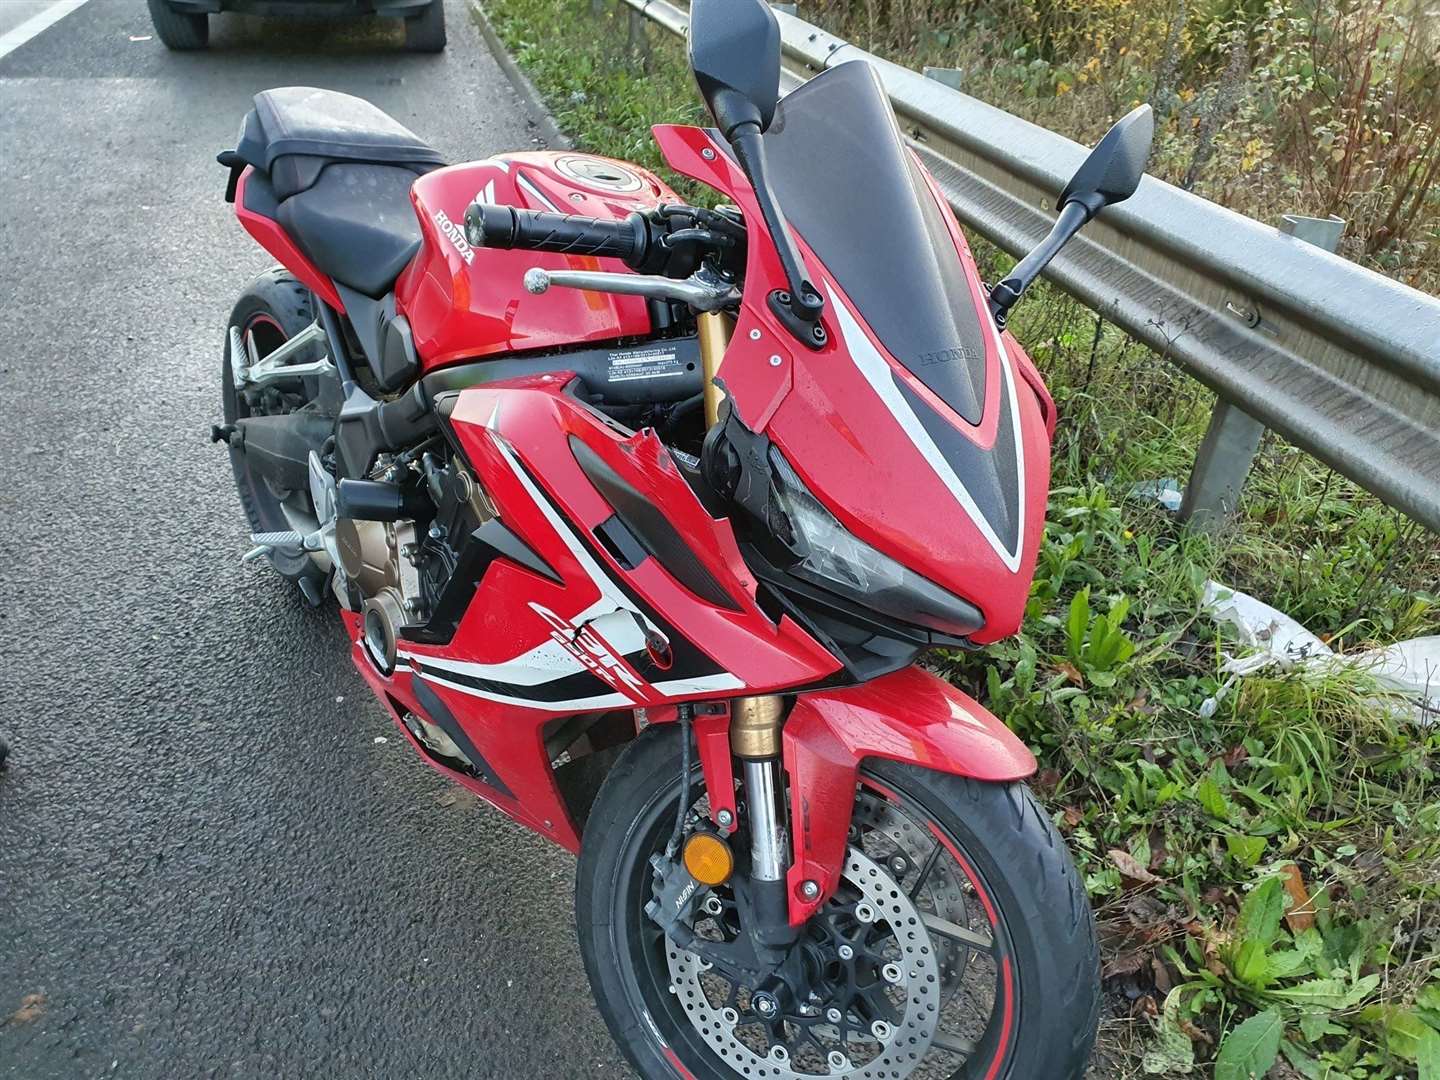 Jade was riding her Honda on the A2 when she was knocked off by a blue van (23531235)